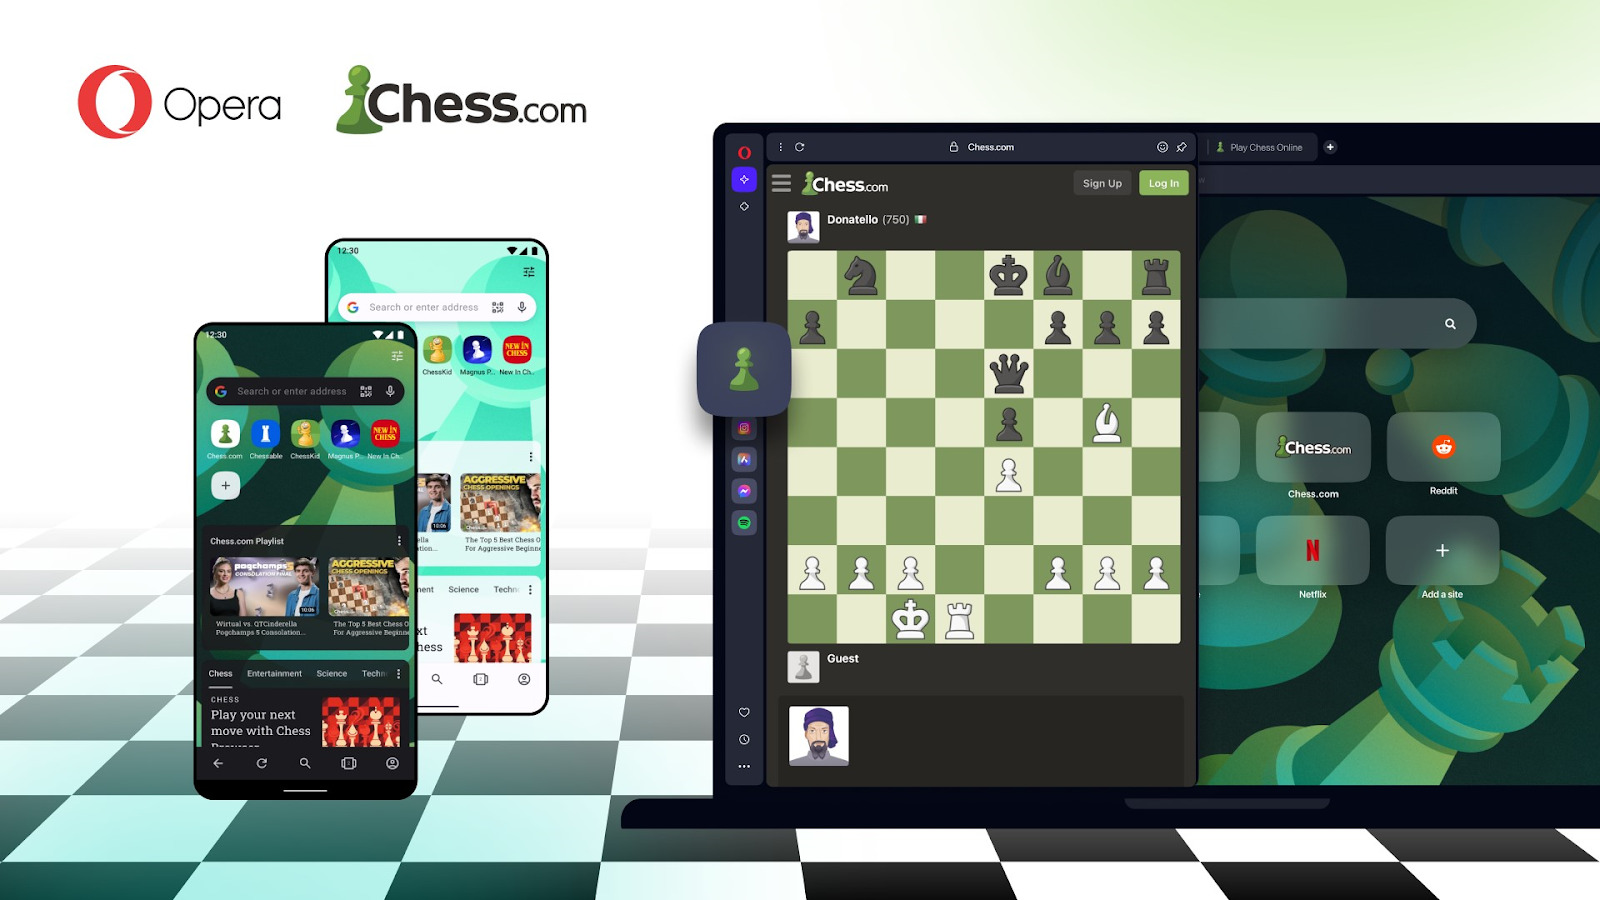 A desktop and two Android devices show off the functionality of Opera's new custom chess builds.